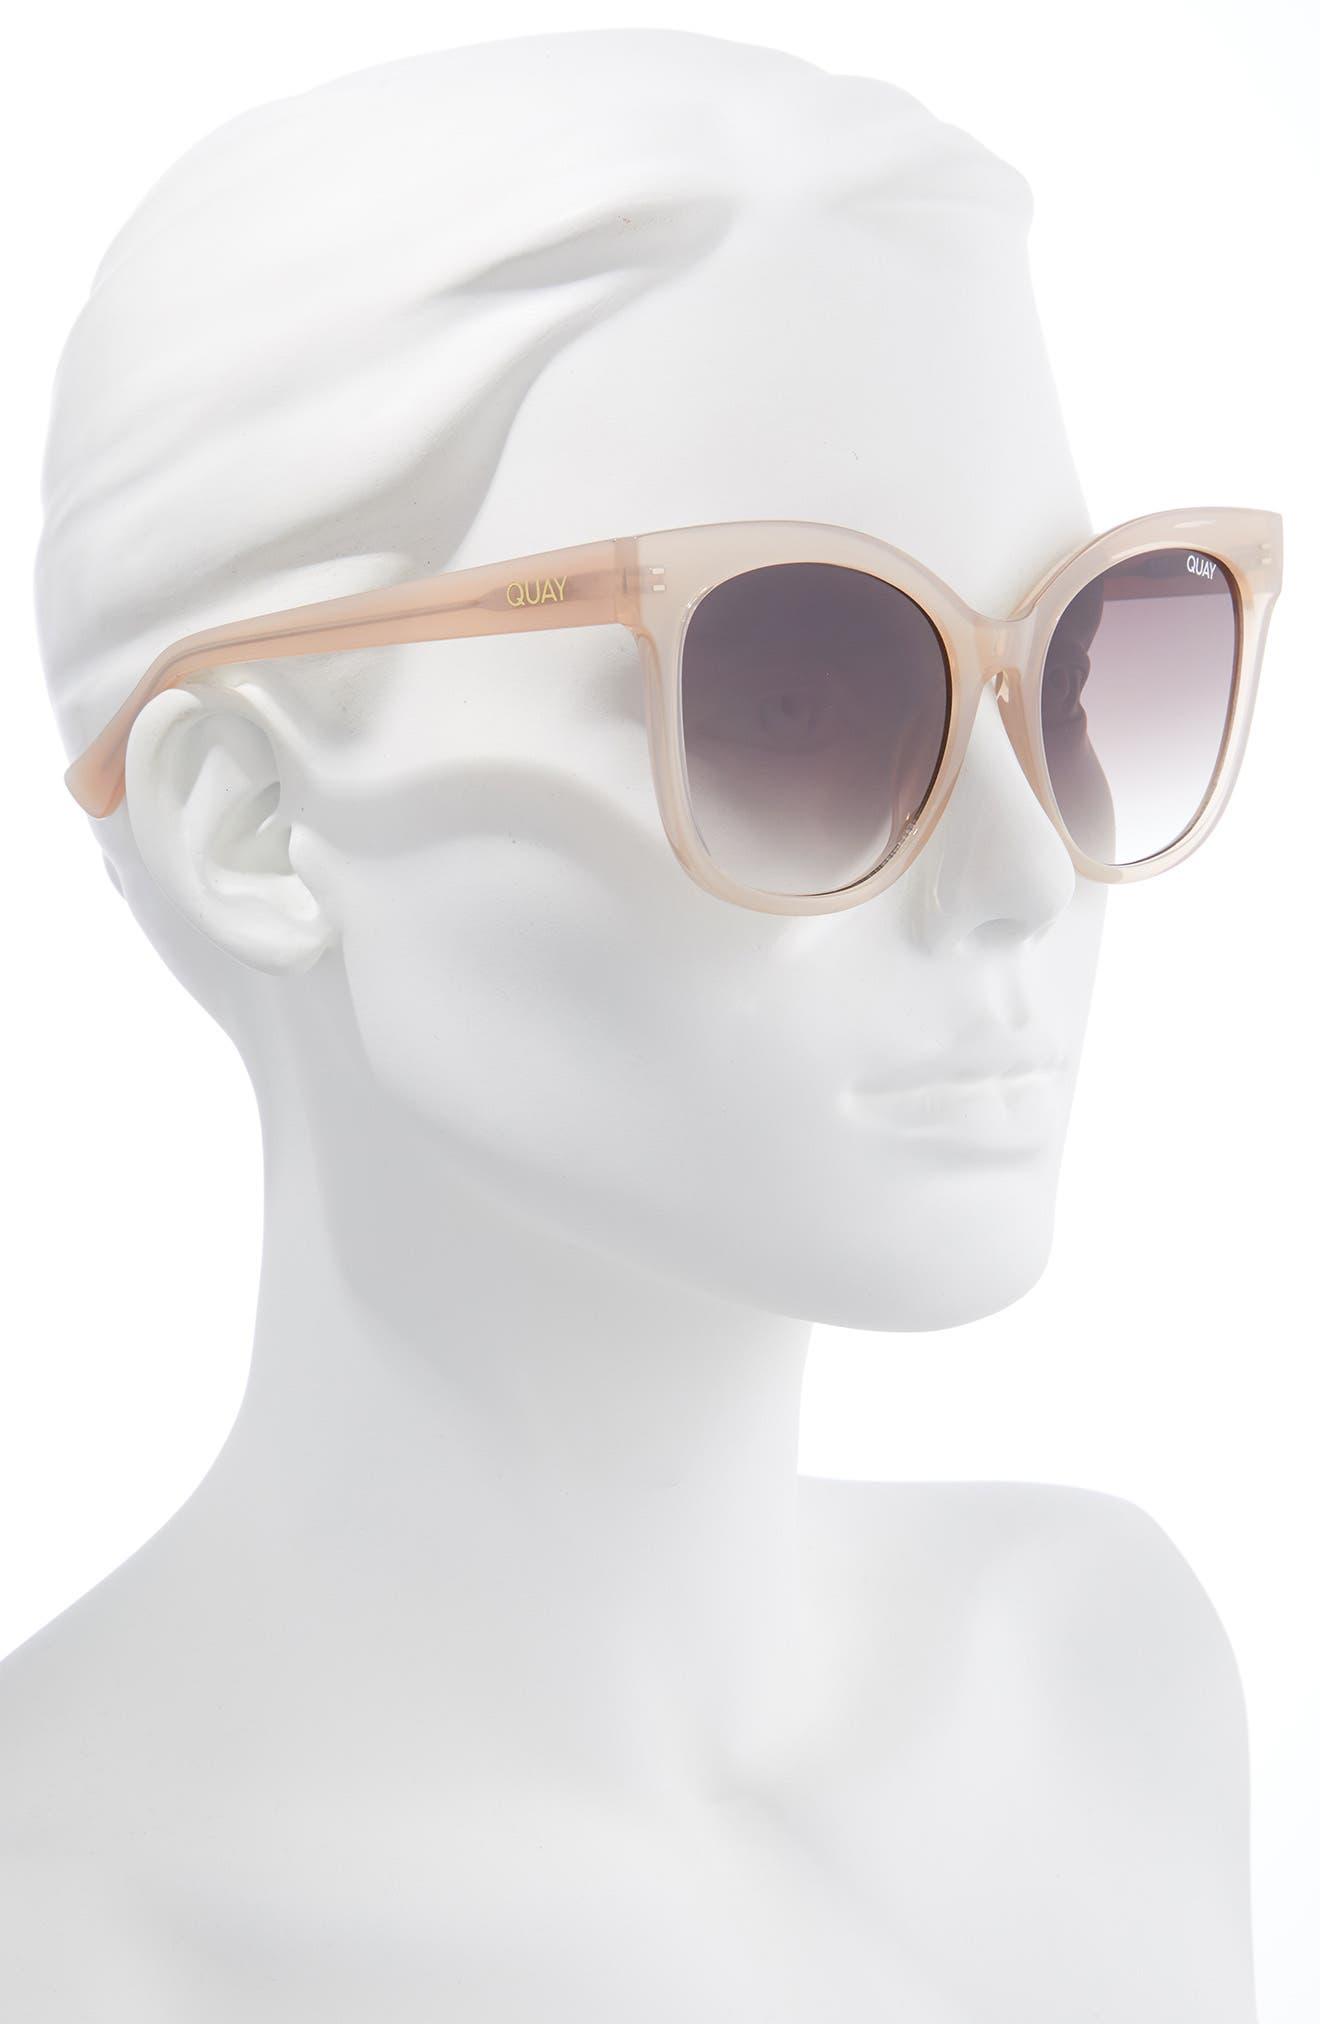 Quay Its My Way 61mm Gradient Cat Eye Sunglasses in Brown